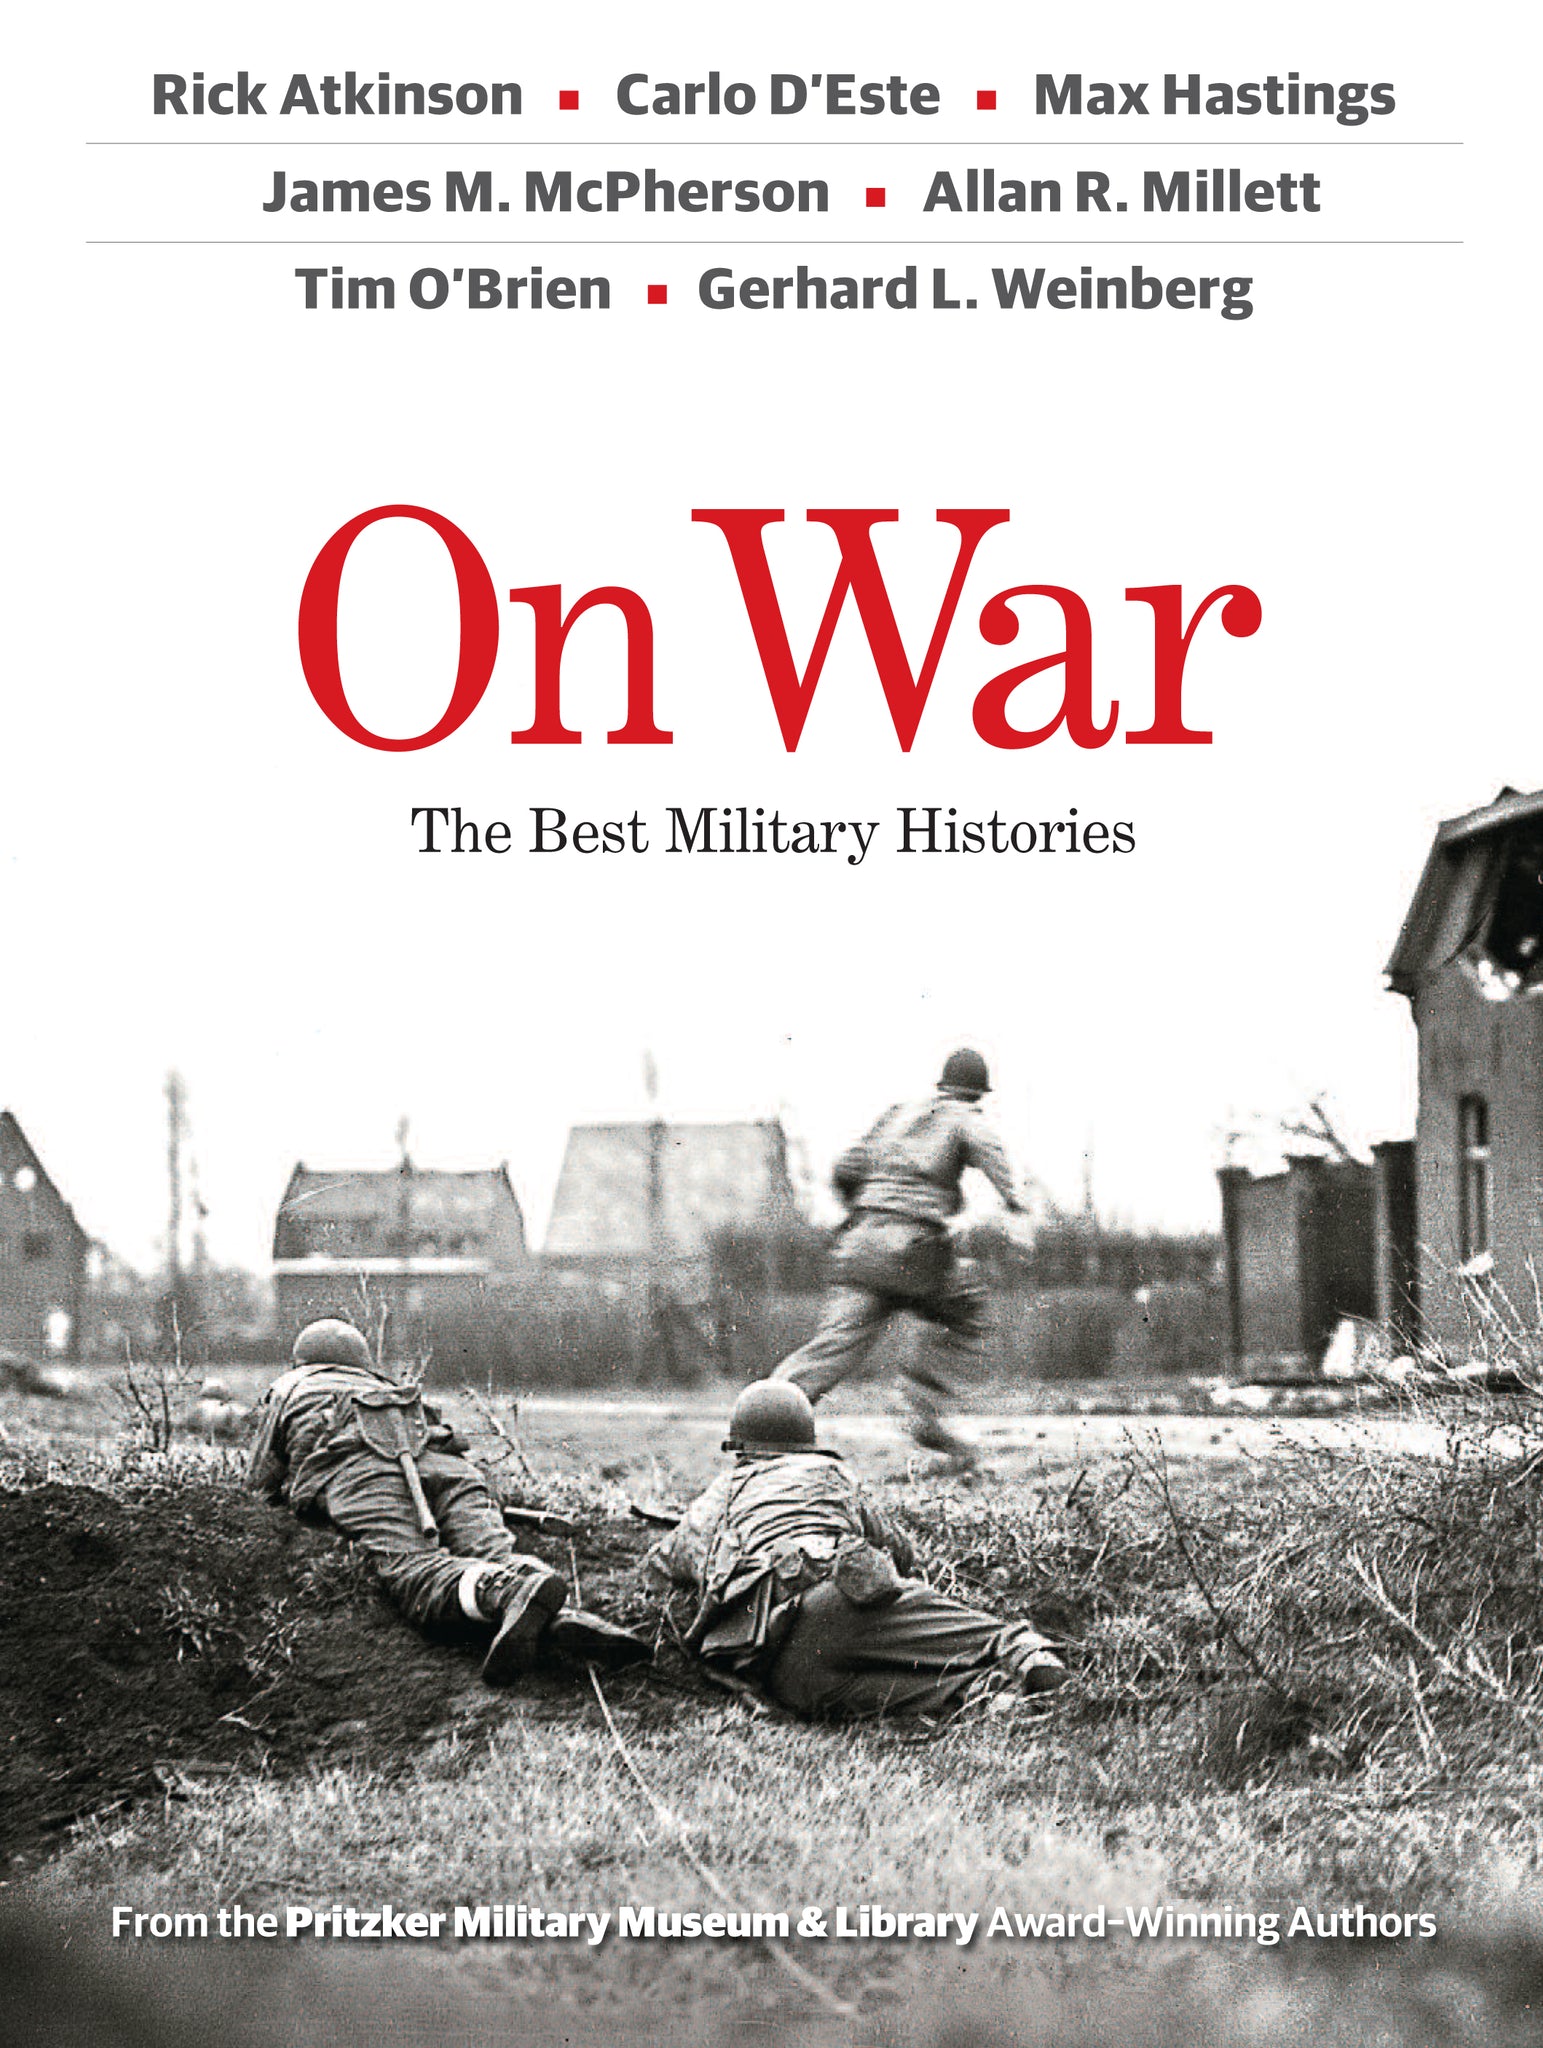 On War: The Best Military Histories by  Rick Atkinson, Carlo D'Este, Max Hastings, James McPeherson, Allan Millet, Tim O'Brien, and Gerhard Weinberg